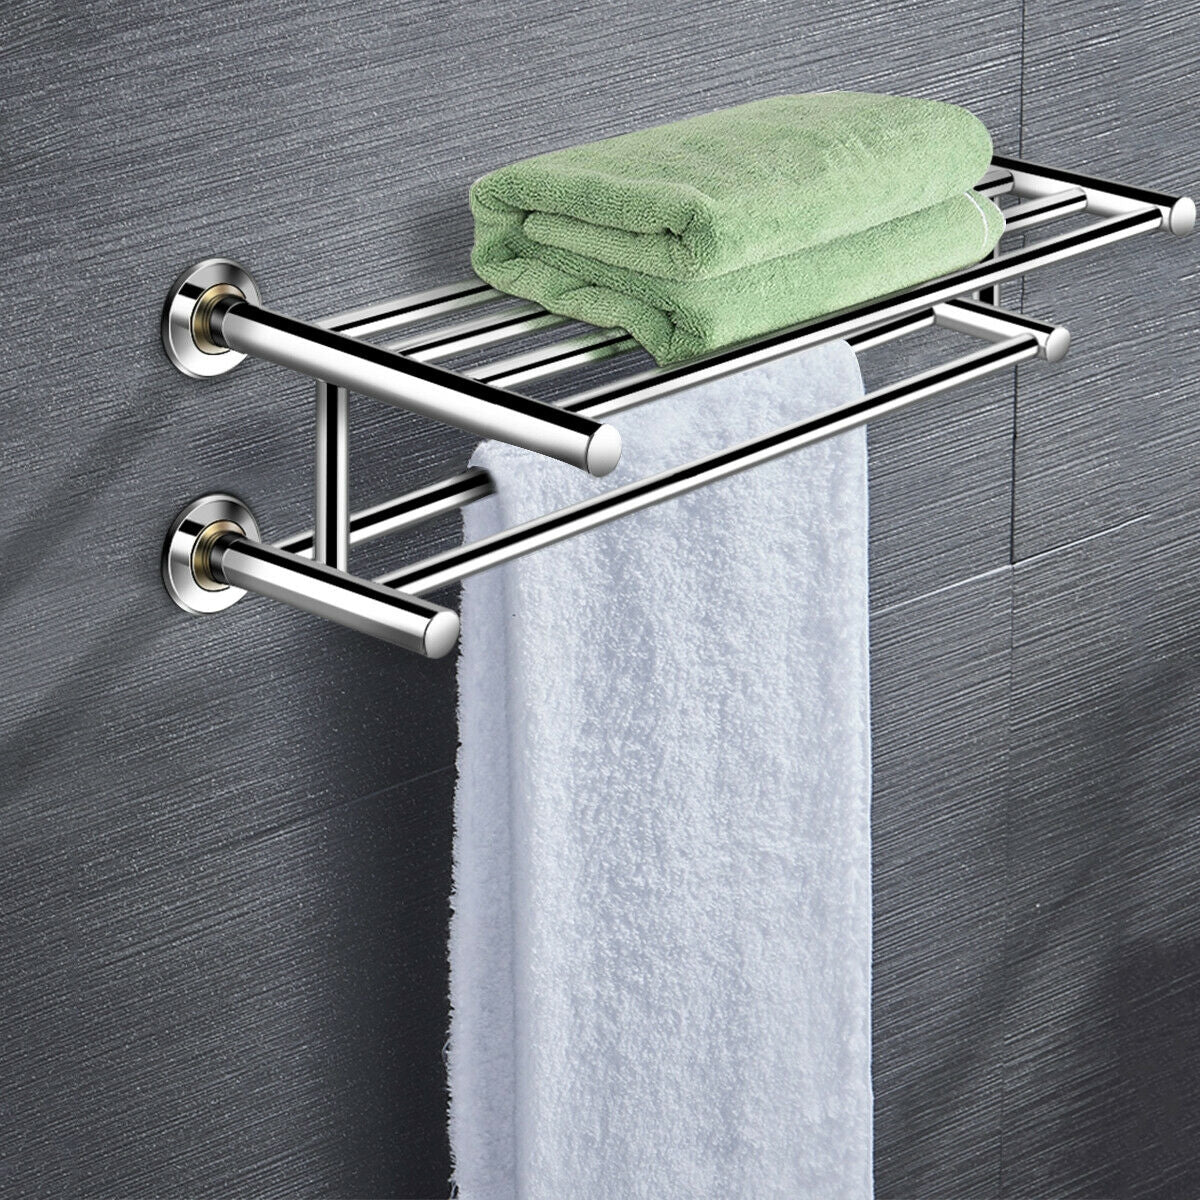 24 Inch Wall Mounted Stainless Steel Towel Storage Rack with 2 Storage Tier - Direct by Wilsons Home Store